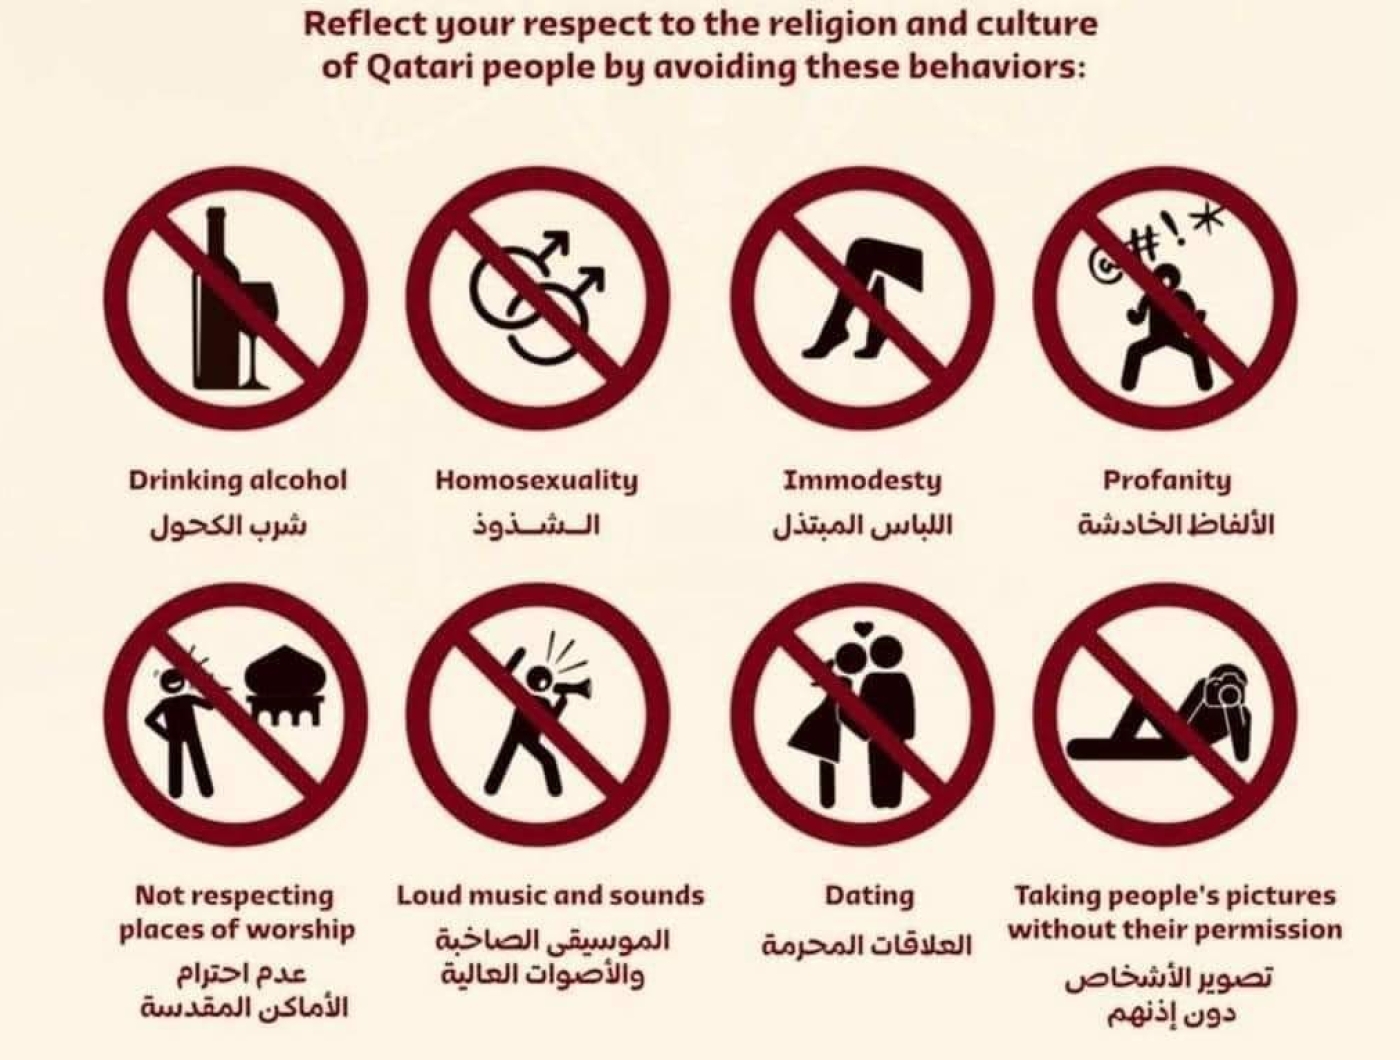 Qatar World Cup 2022: Organisers say controversial infographic is fake | Middle East Eye